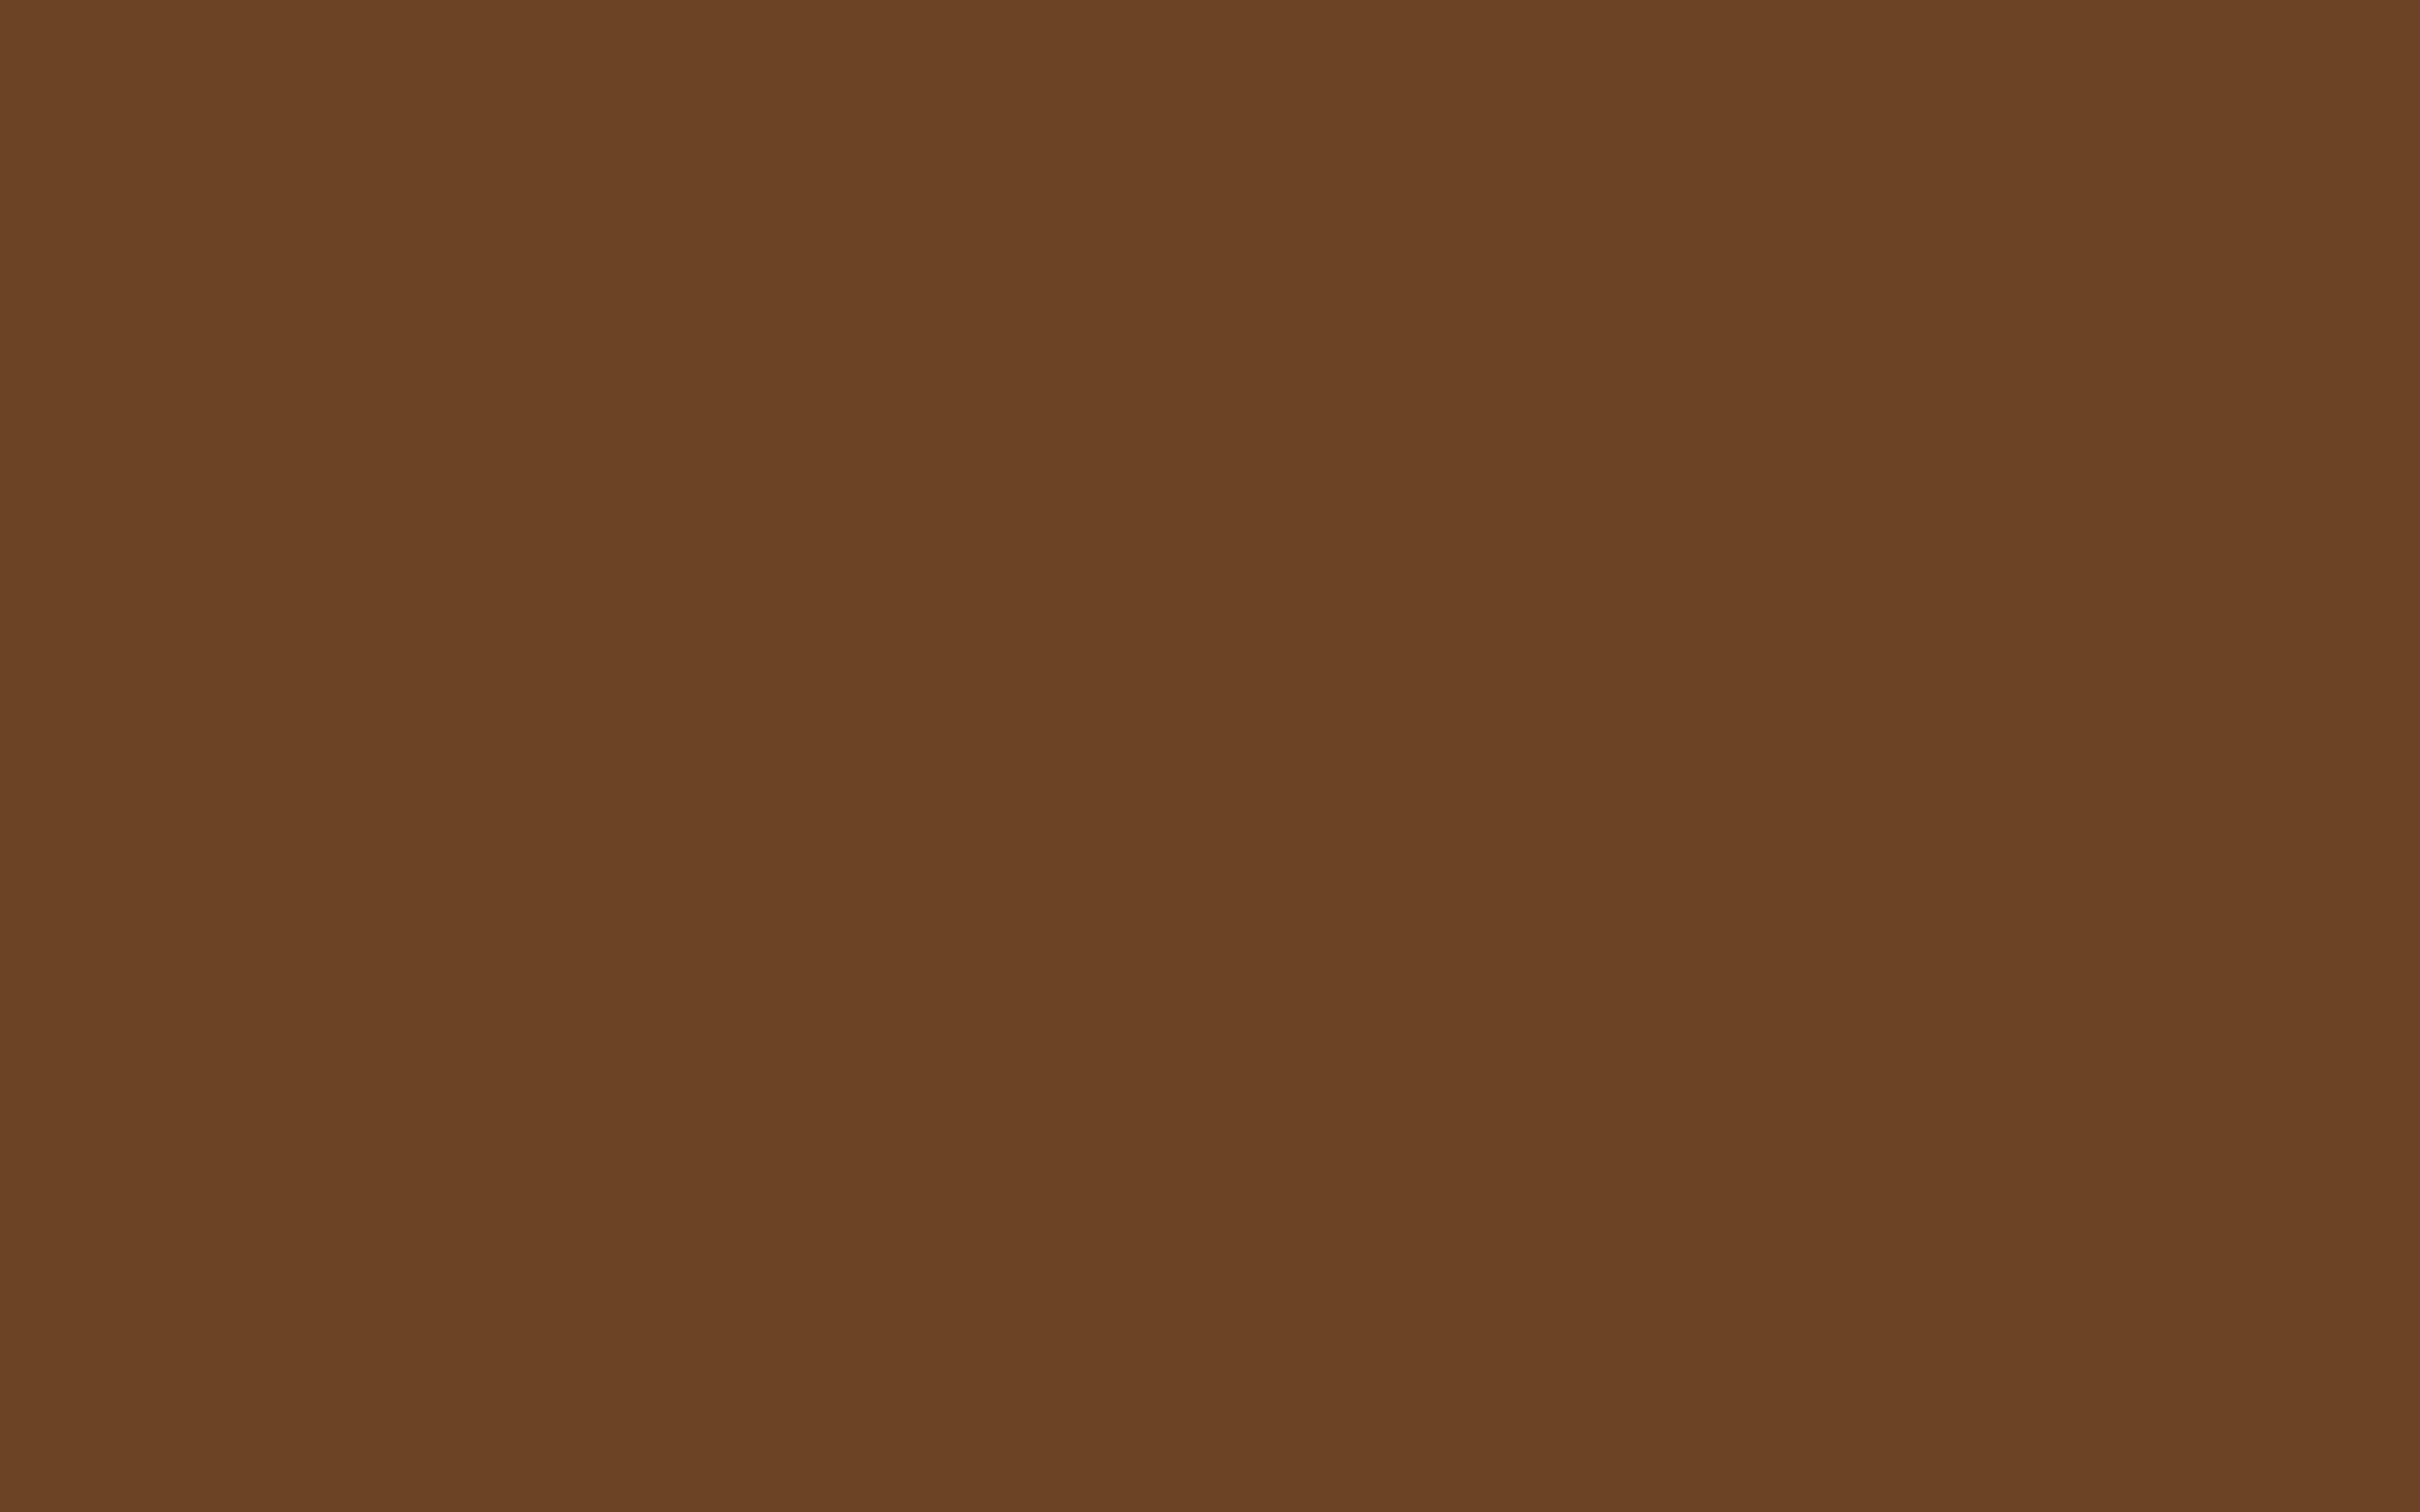 2560x1600 Brown-nose Solid Color Background